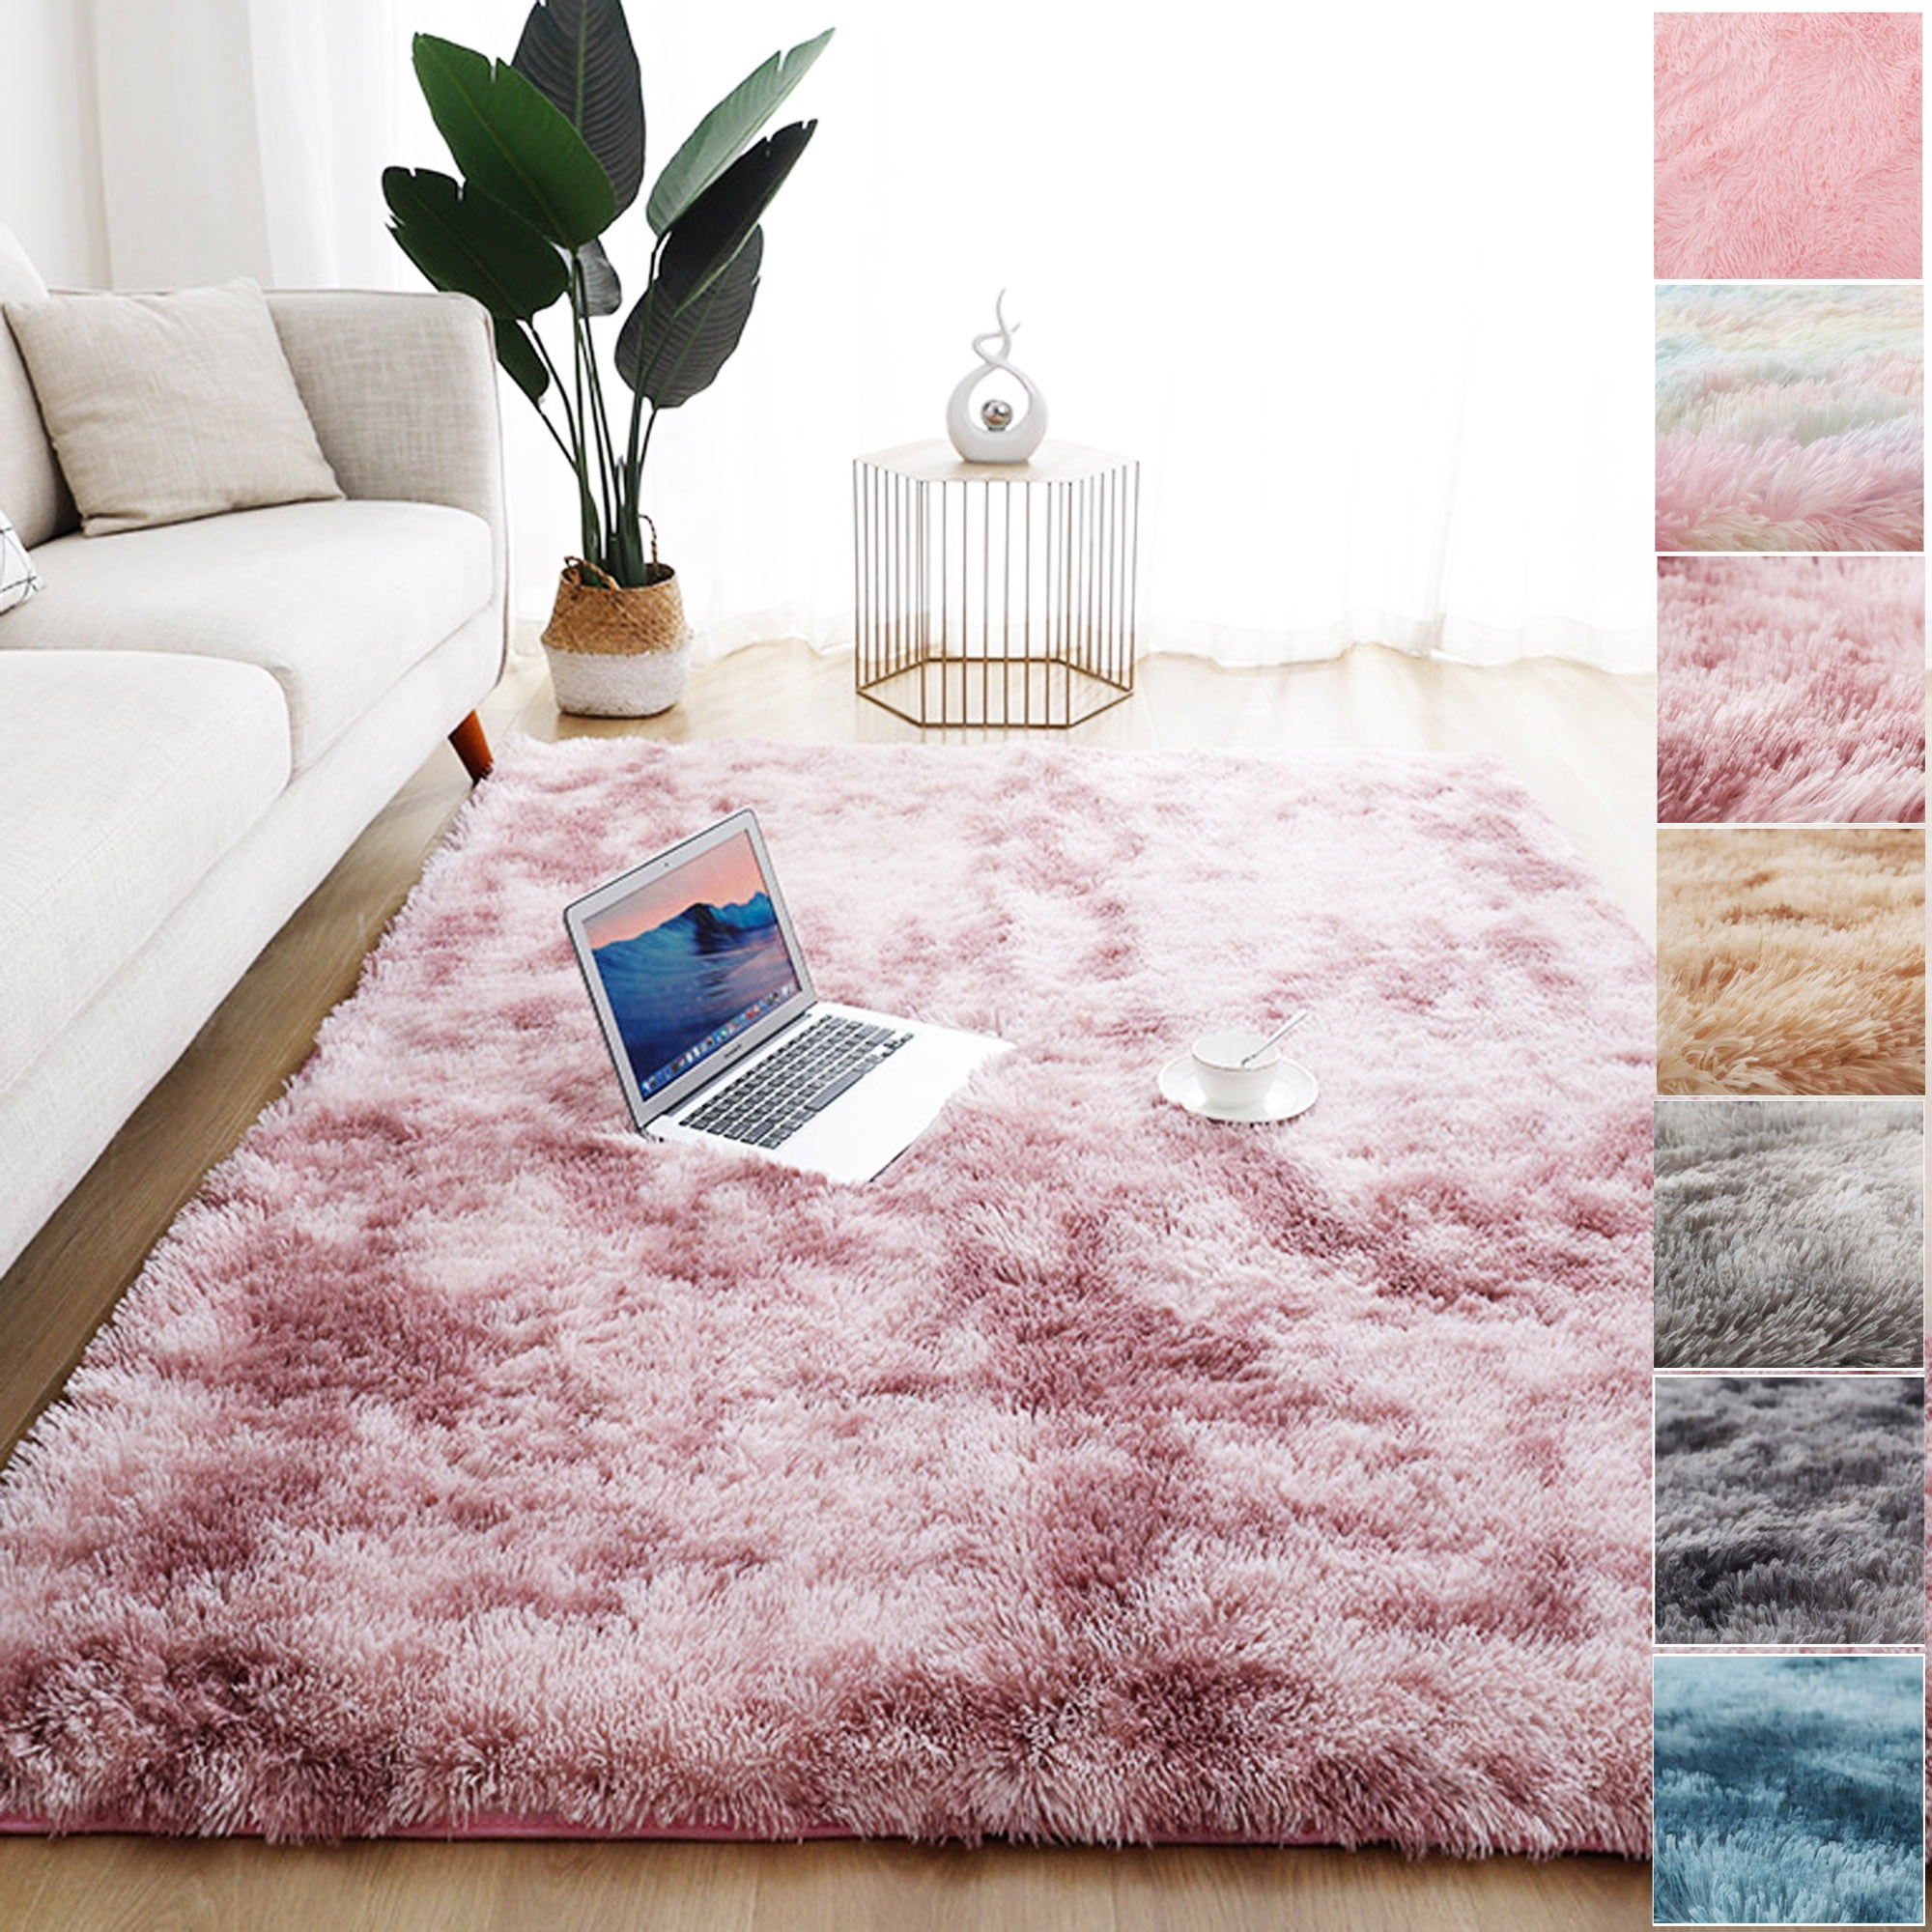 Rectangle Shaggy Carpet Floor Pads Soft Mat Fluffy Area Rugs Bedroom Living Room 